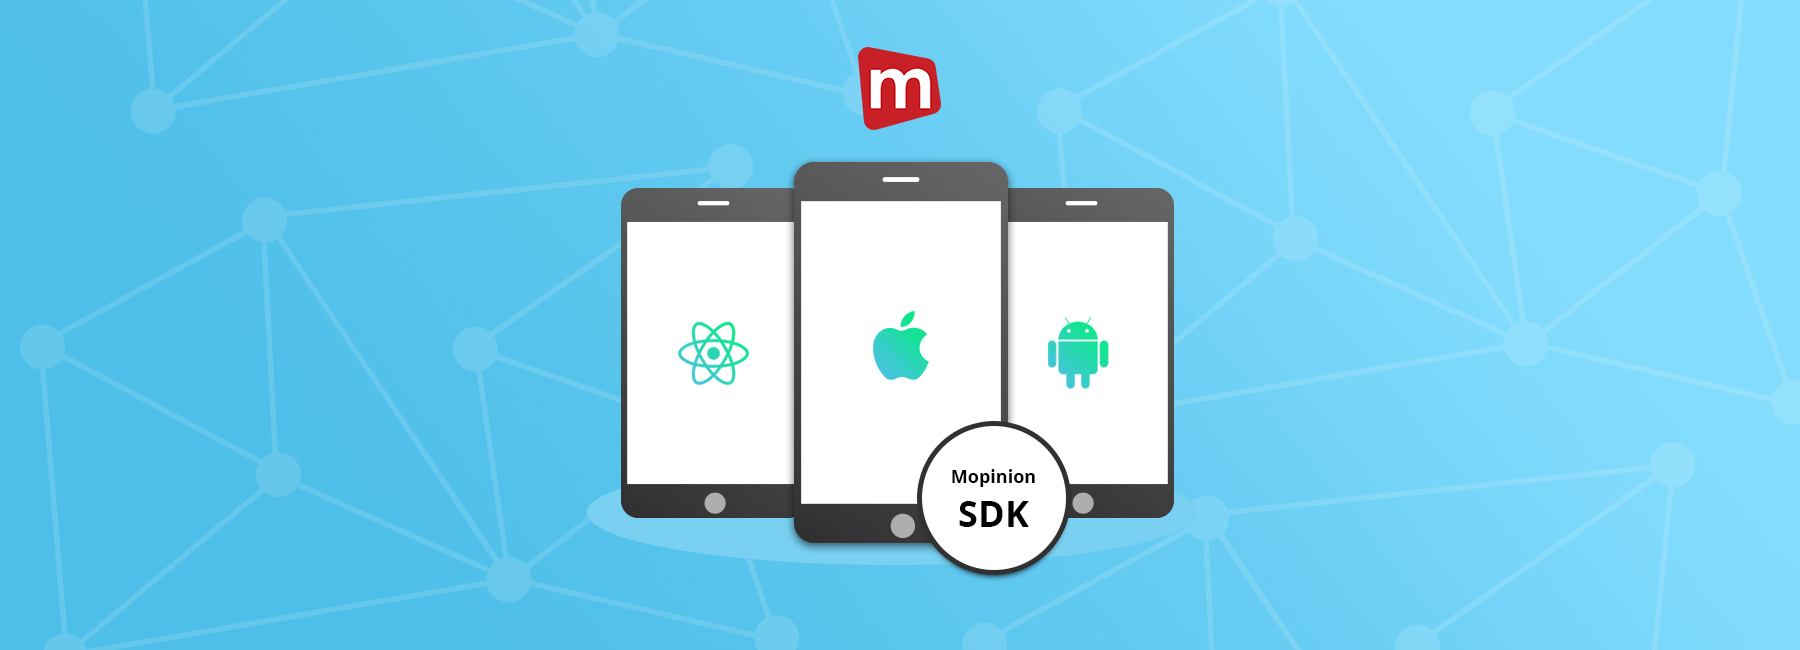 Mopinion releases new mobile SDK to collect in-app feedback